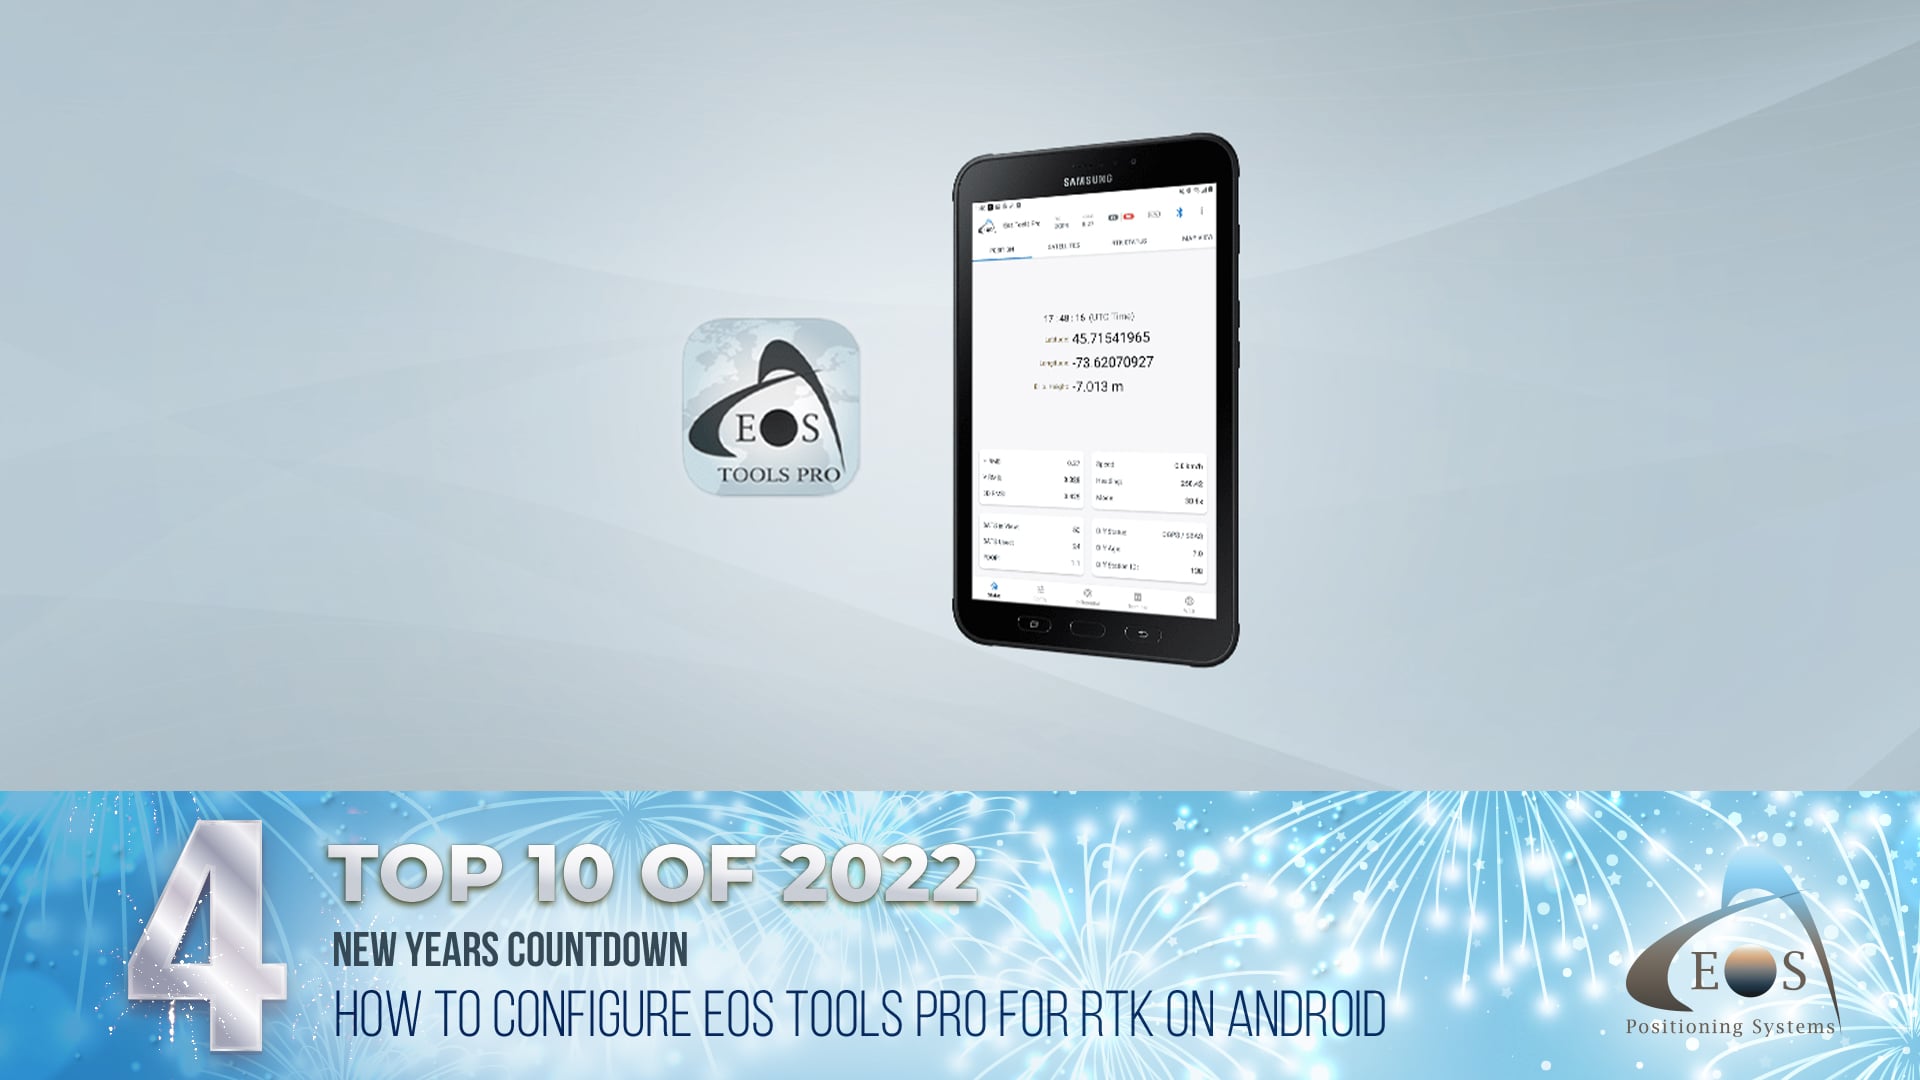 4 How to Configure Eos Tools Pro for RTK on Android - Top 10 of 2022